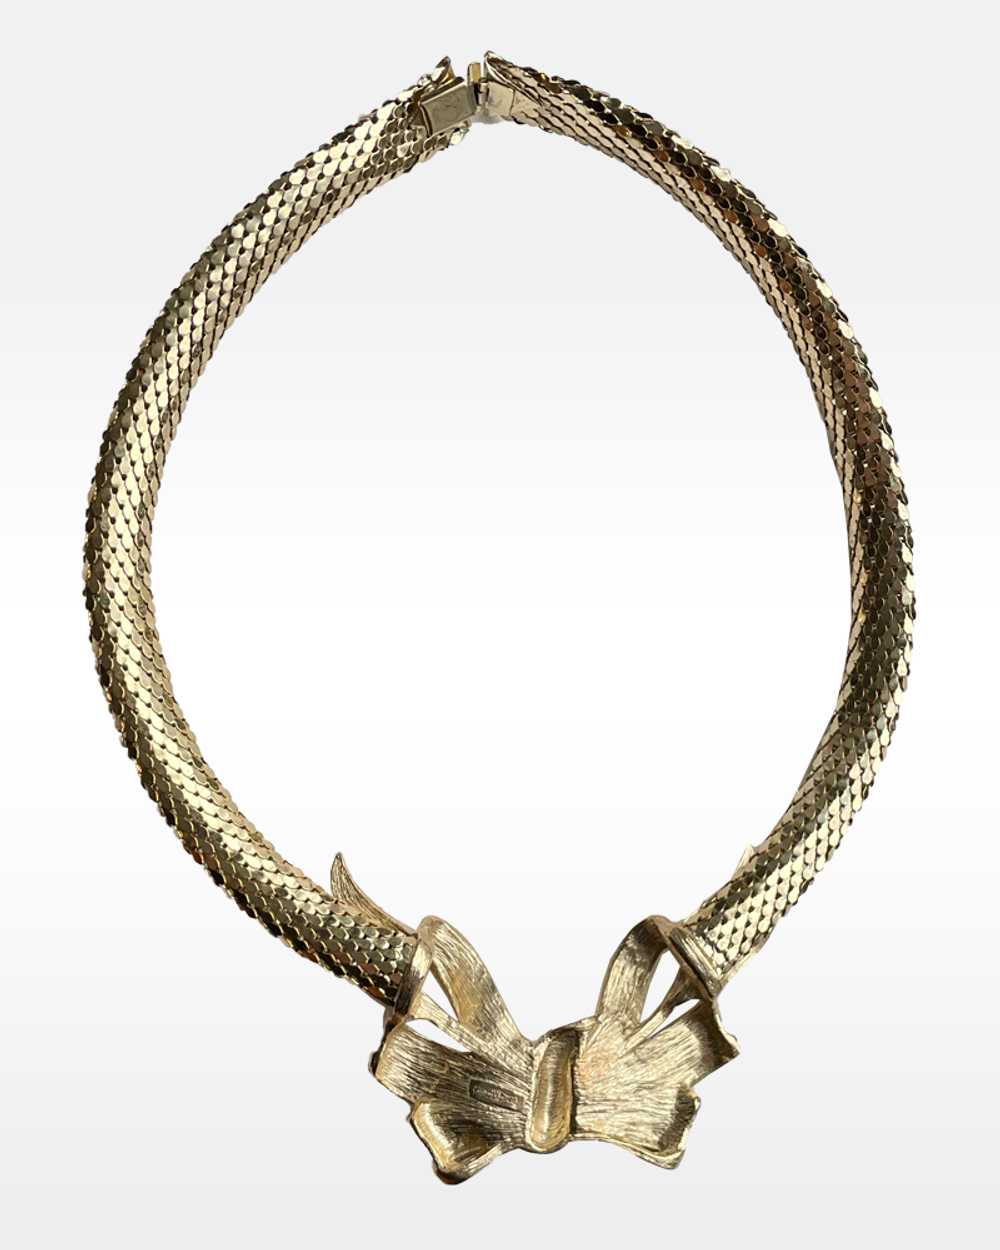 Whiting and Davis Gold and Rhinestone Bow Necklace - image 5